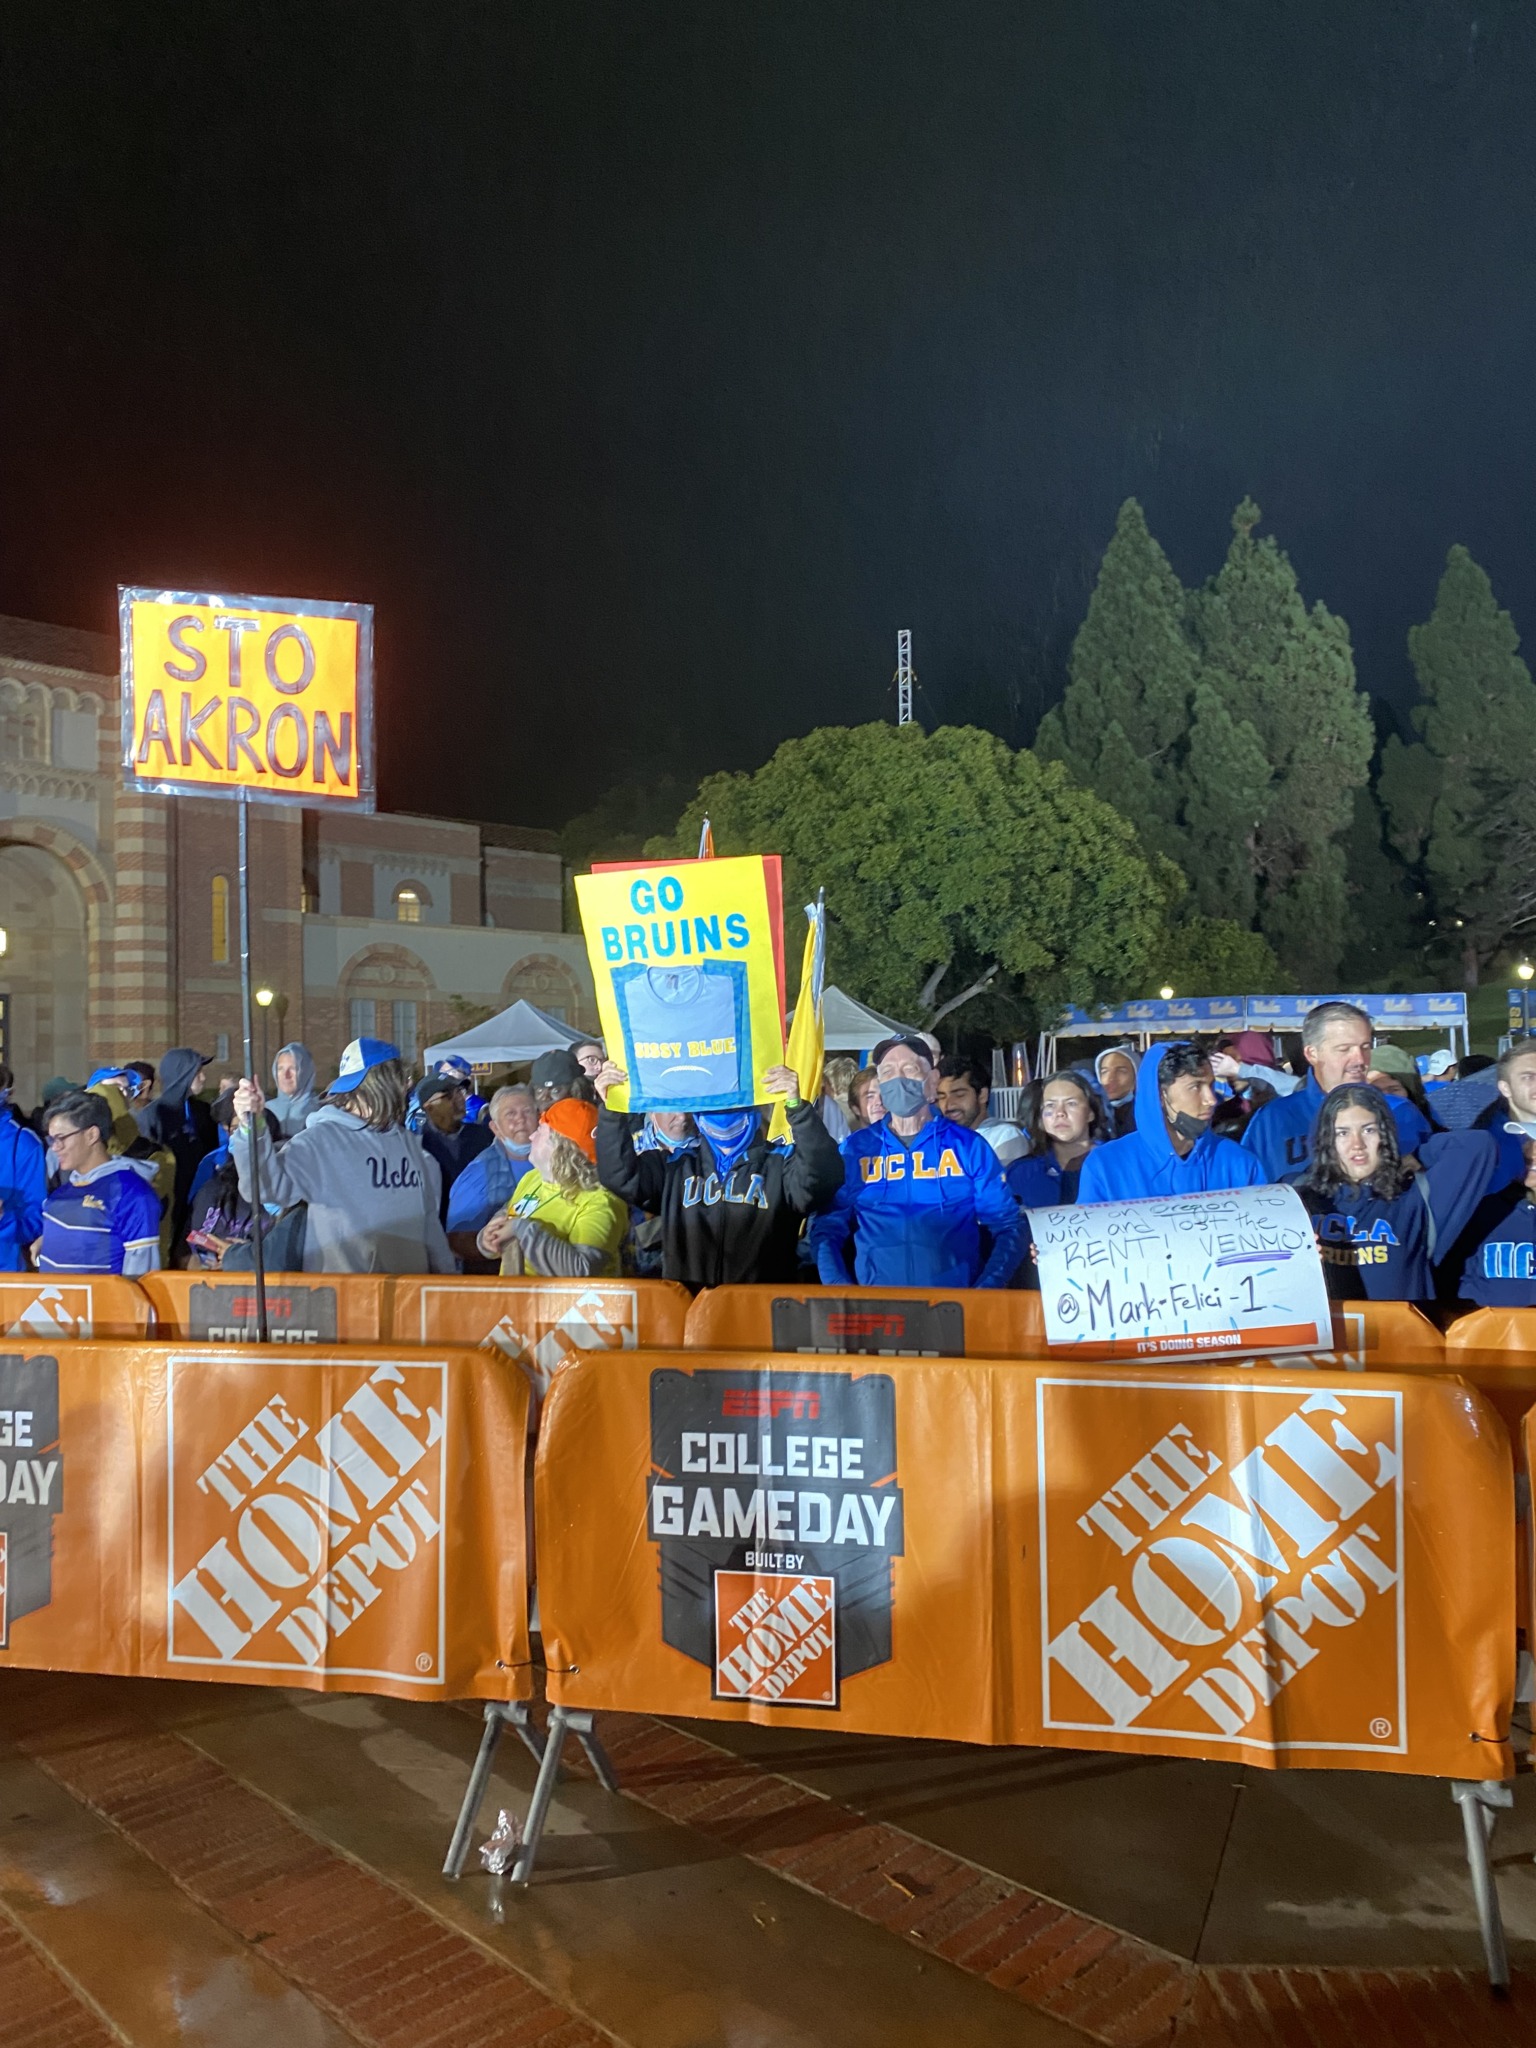 UCLA fans standing in the dark waiting for GameDay to start. 